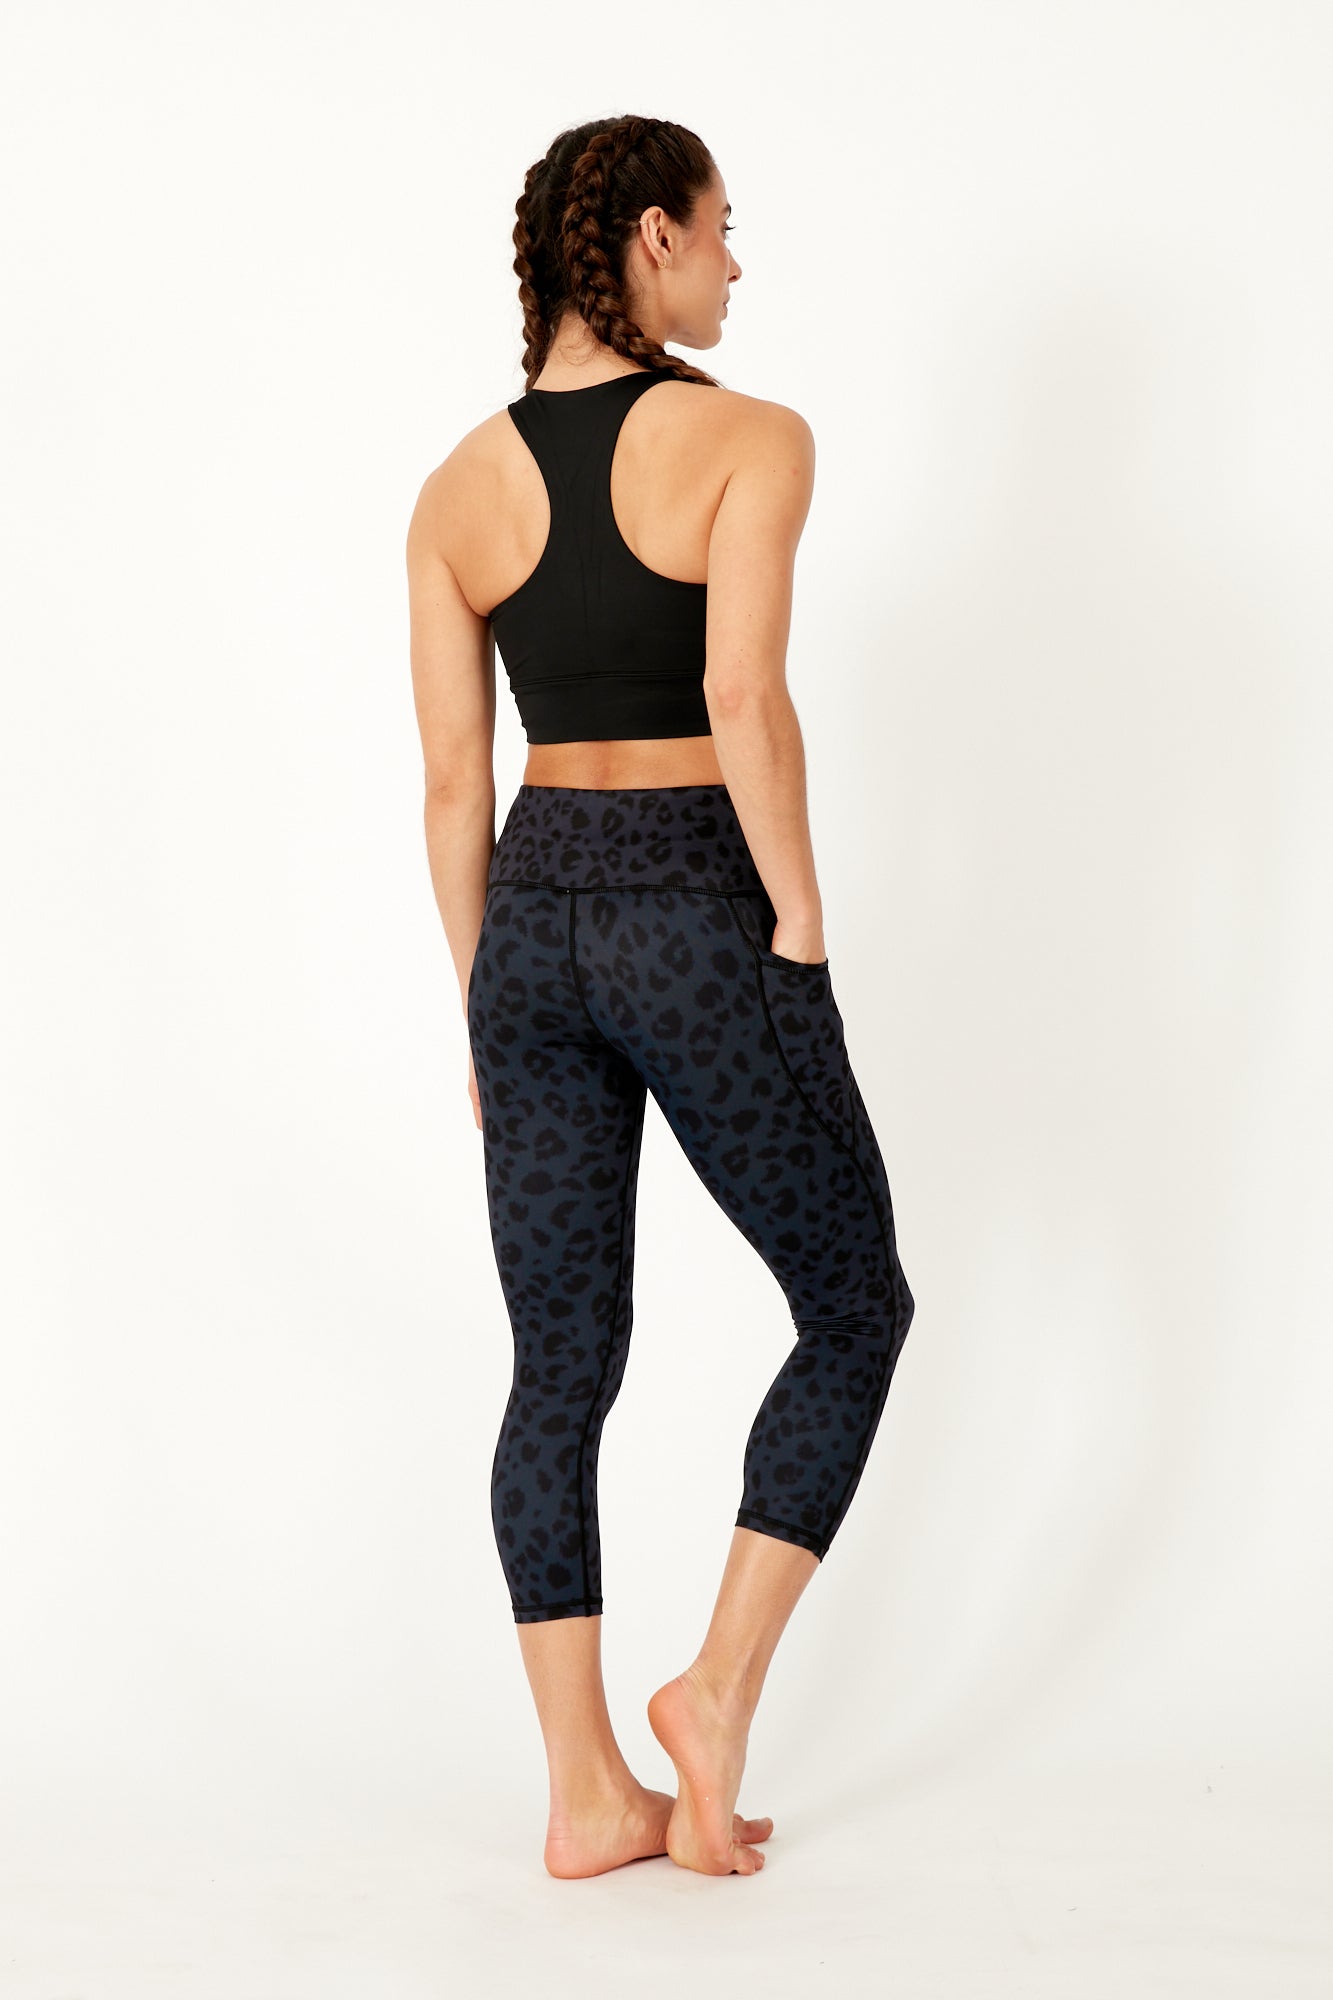 UUE 24Inseam Leopard seamless leggings with inner pockets for